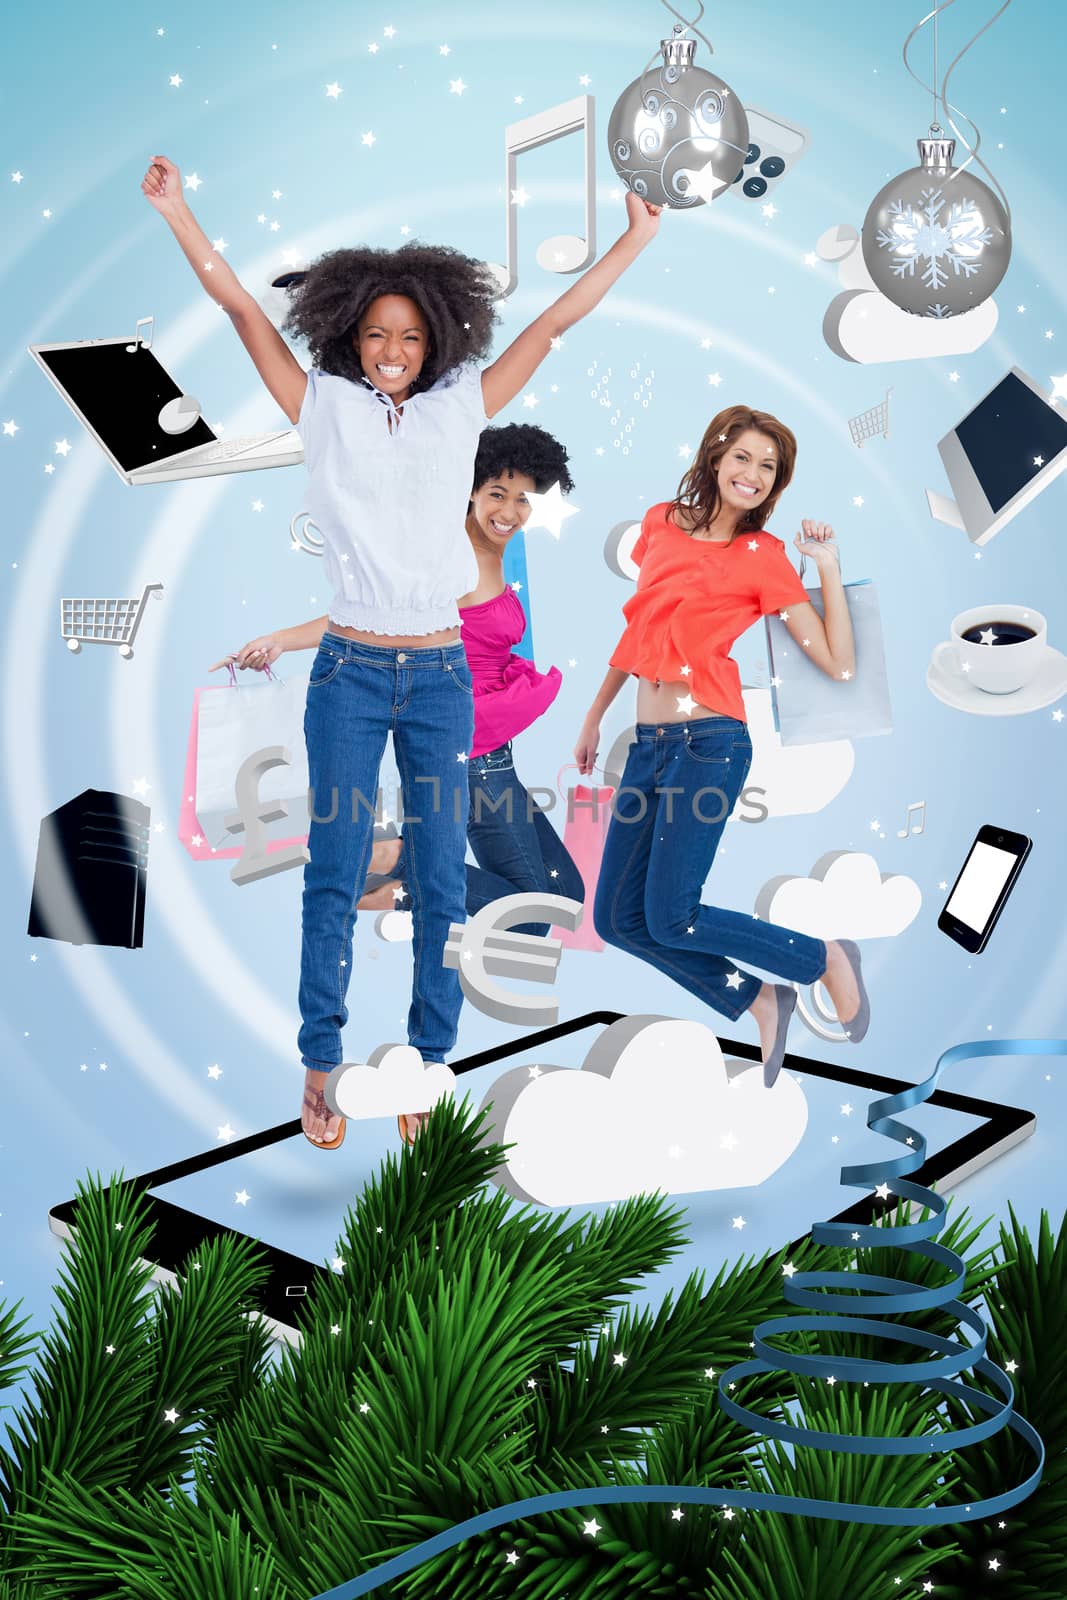 Three cute women jumping on a tablet pc against twinkling stars